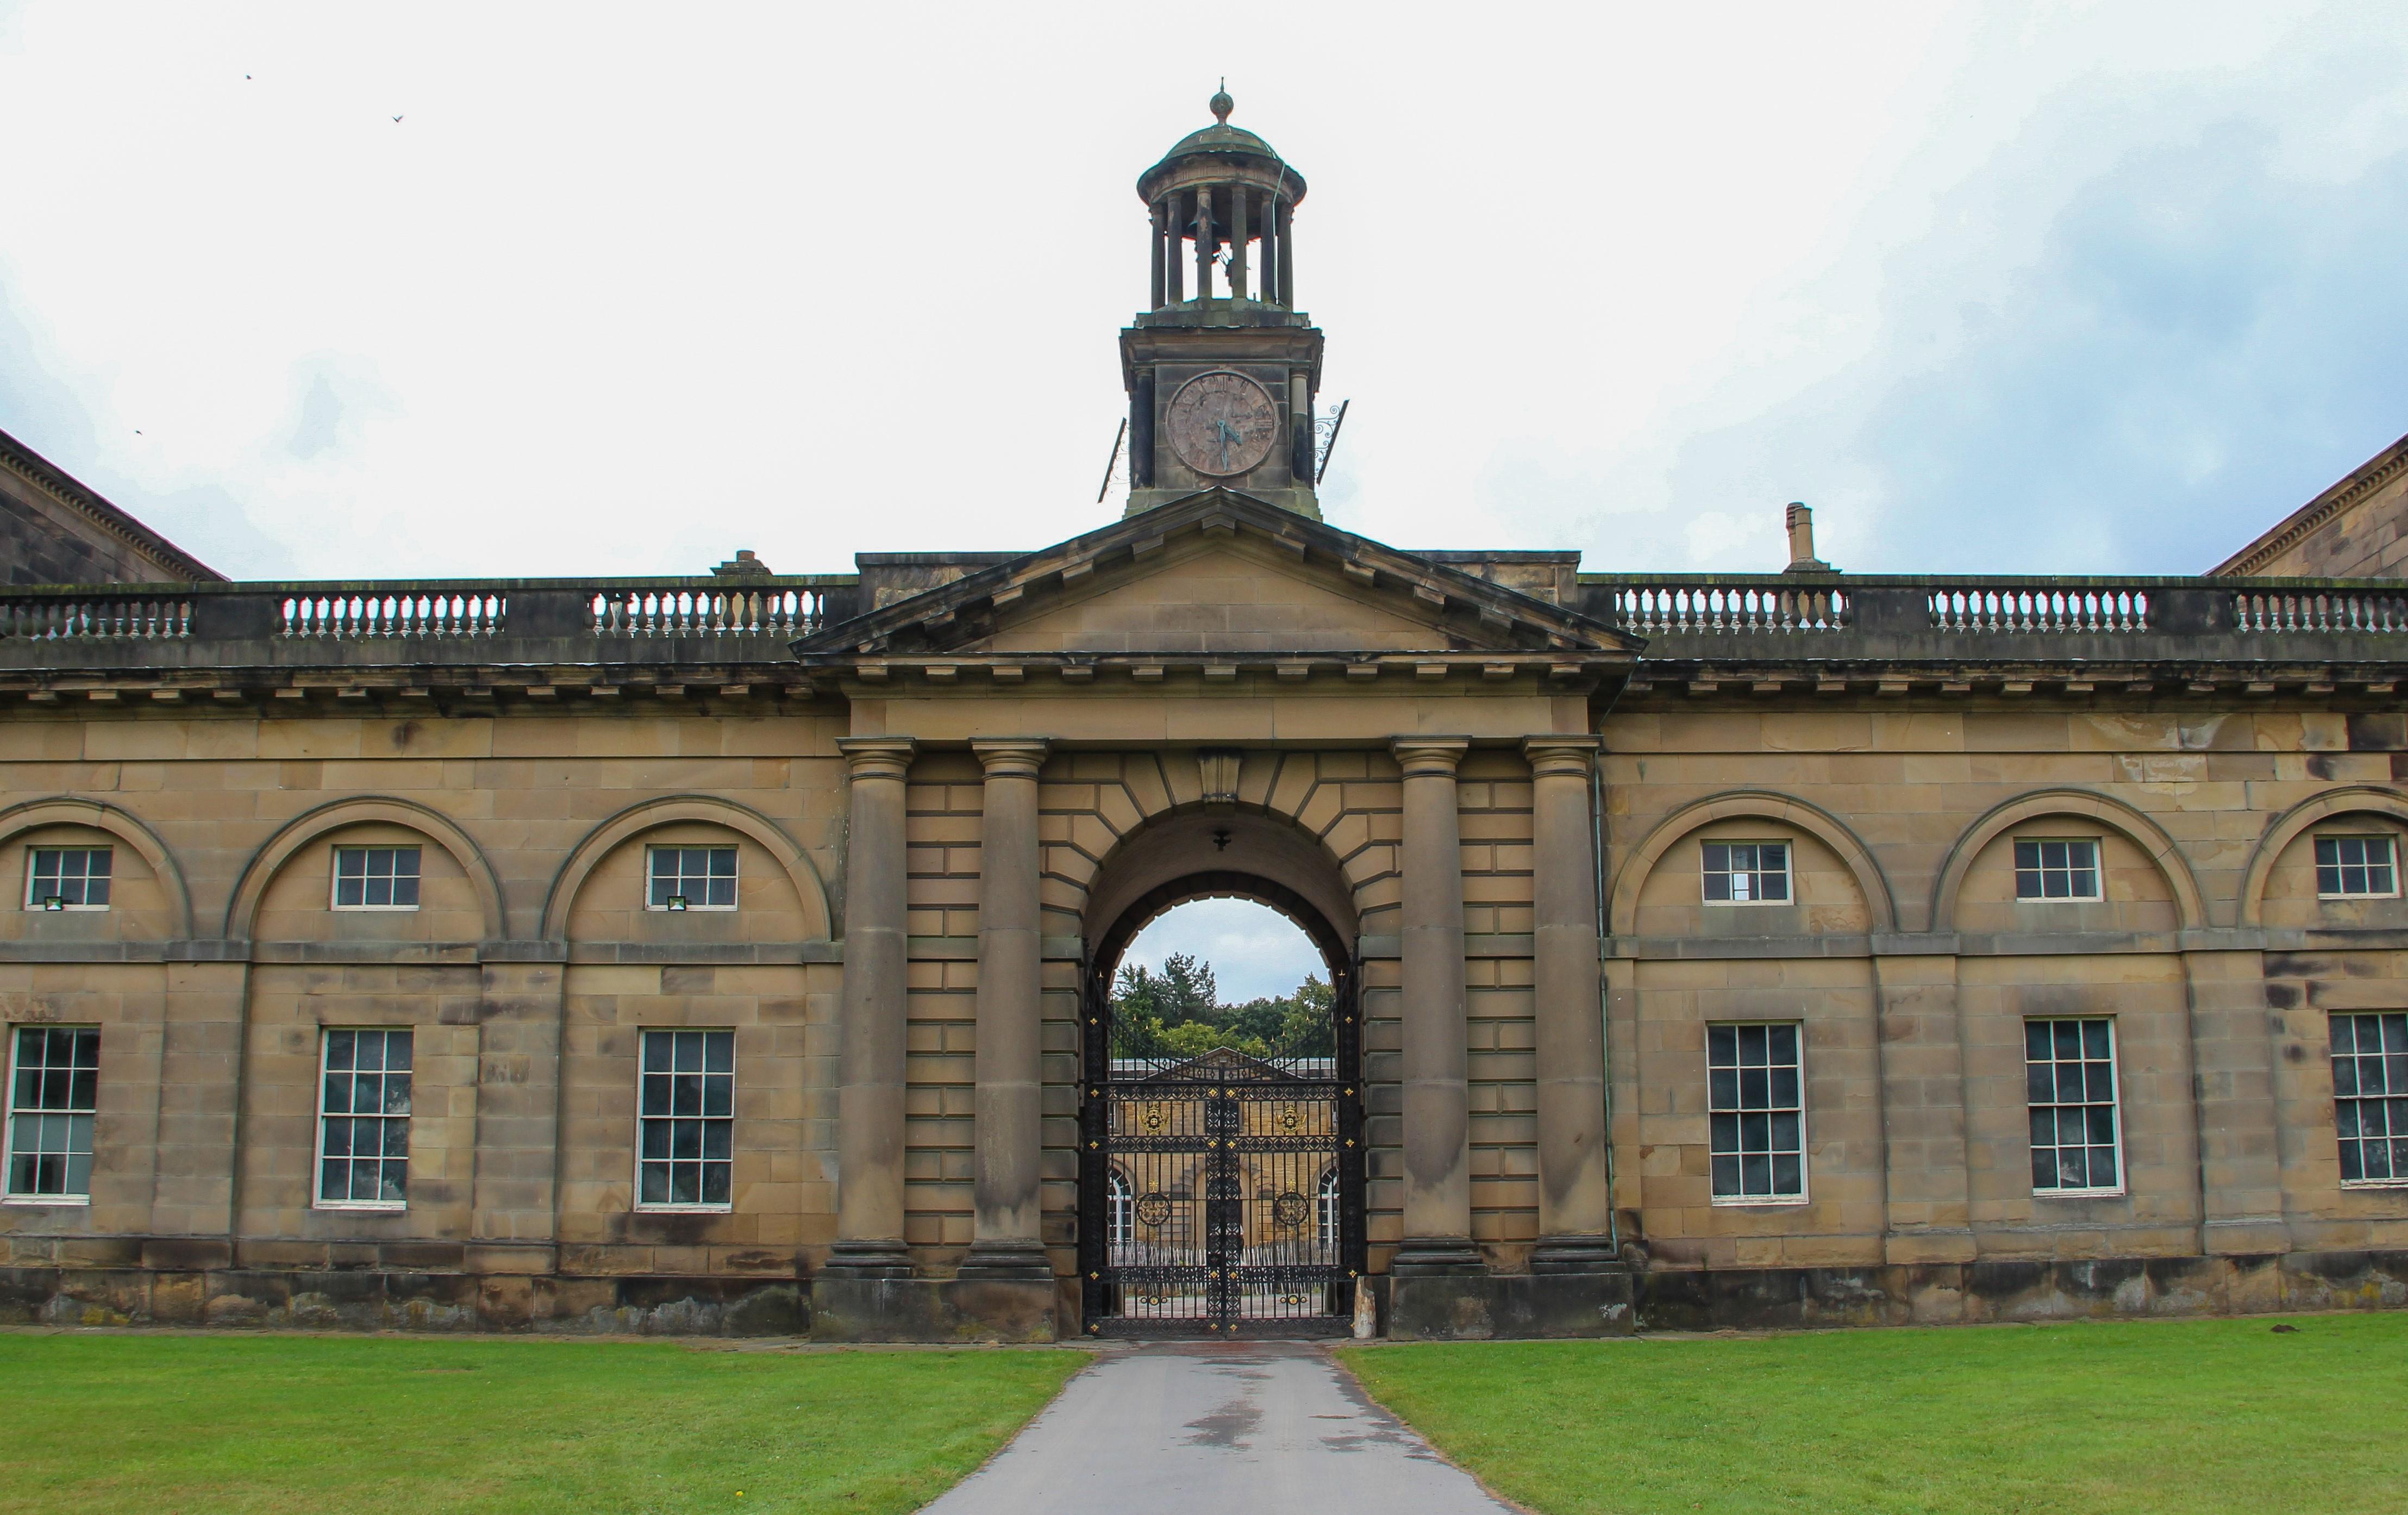 Wentworth woodhouse